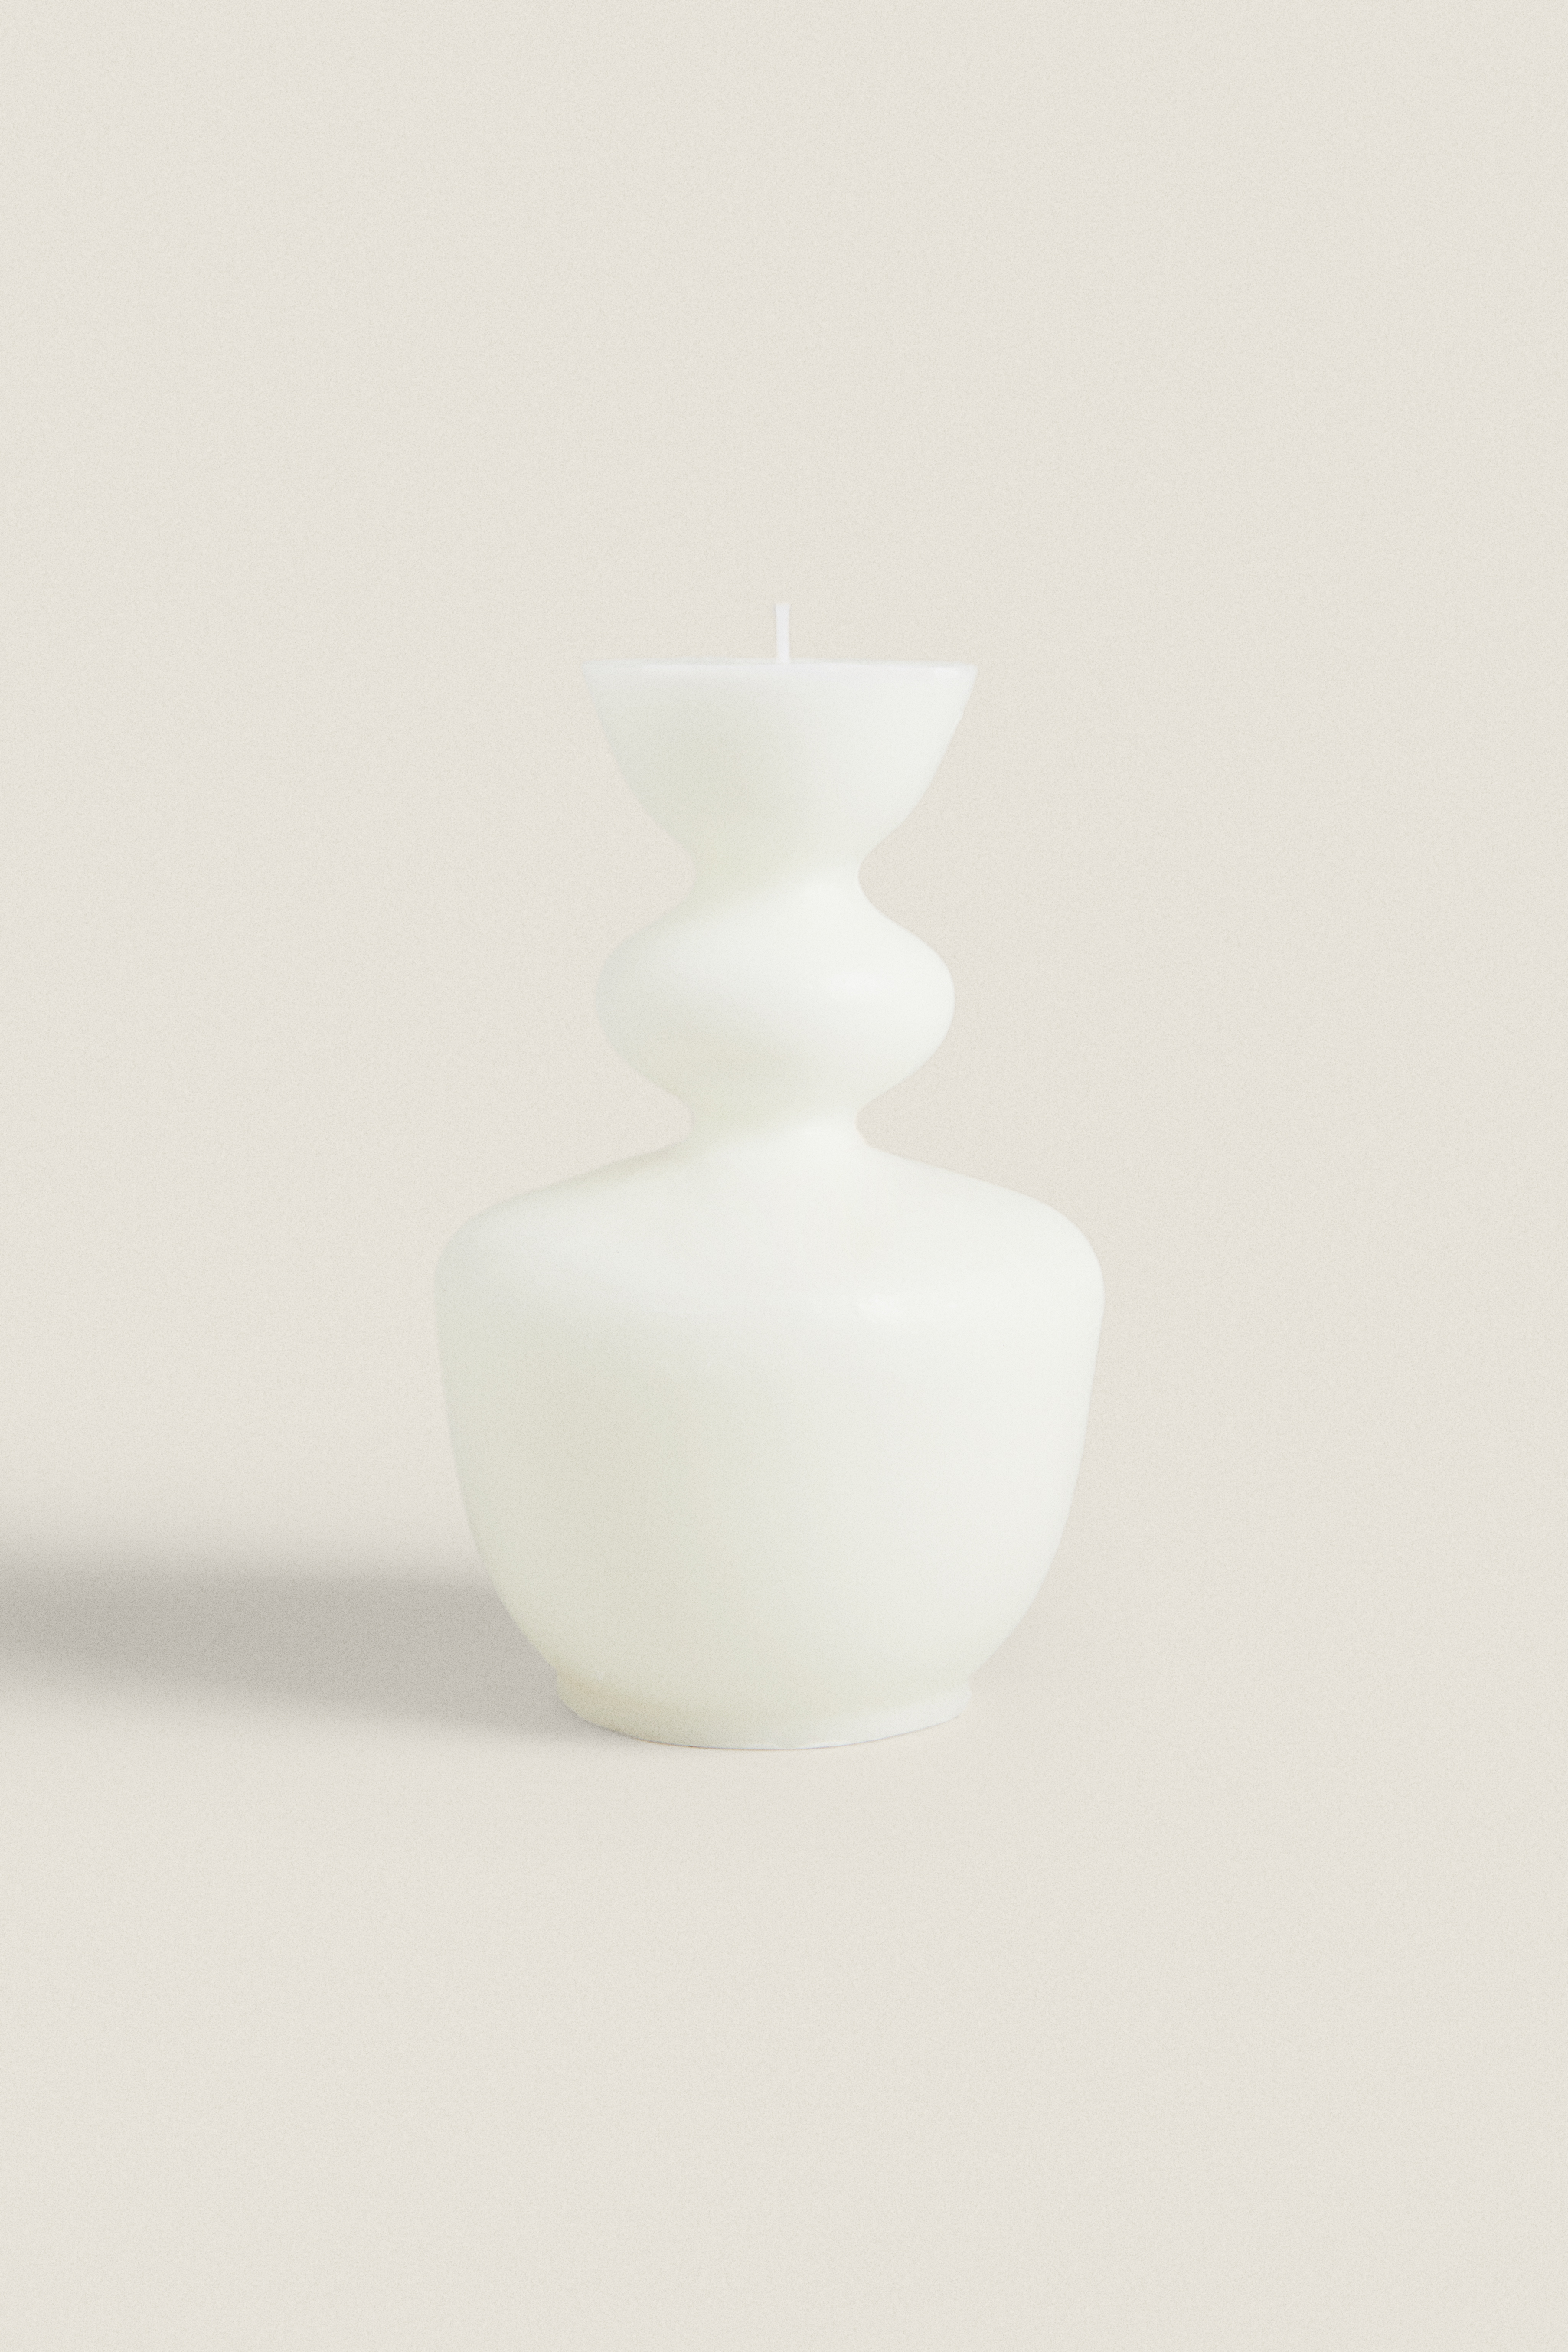 G) FLORAL BEYOND SCENTED CANDLE CANDLESTICK